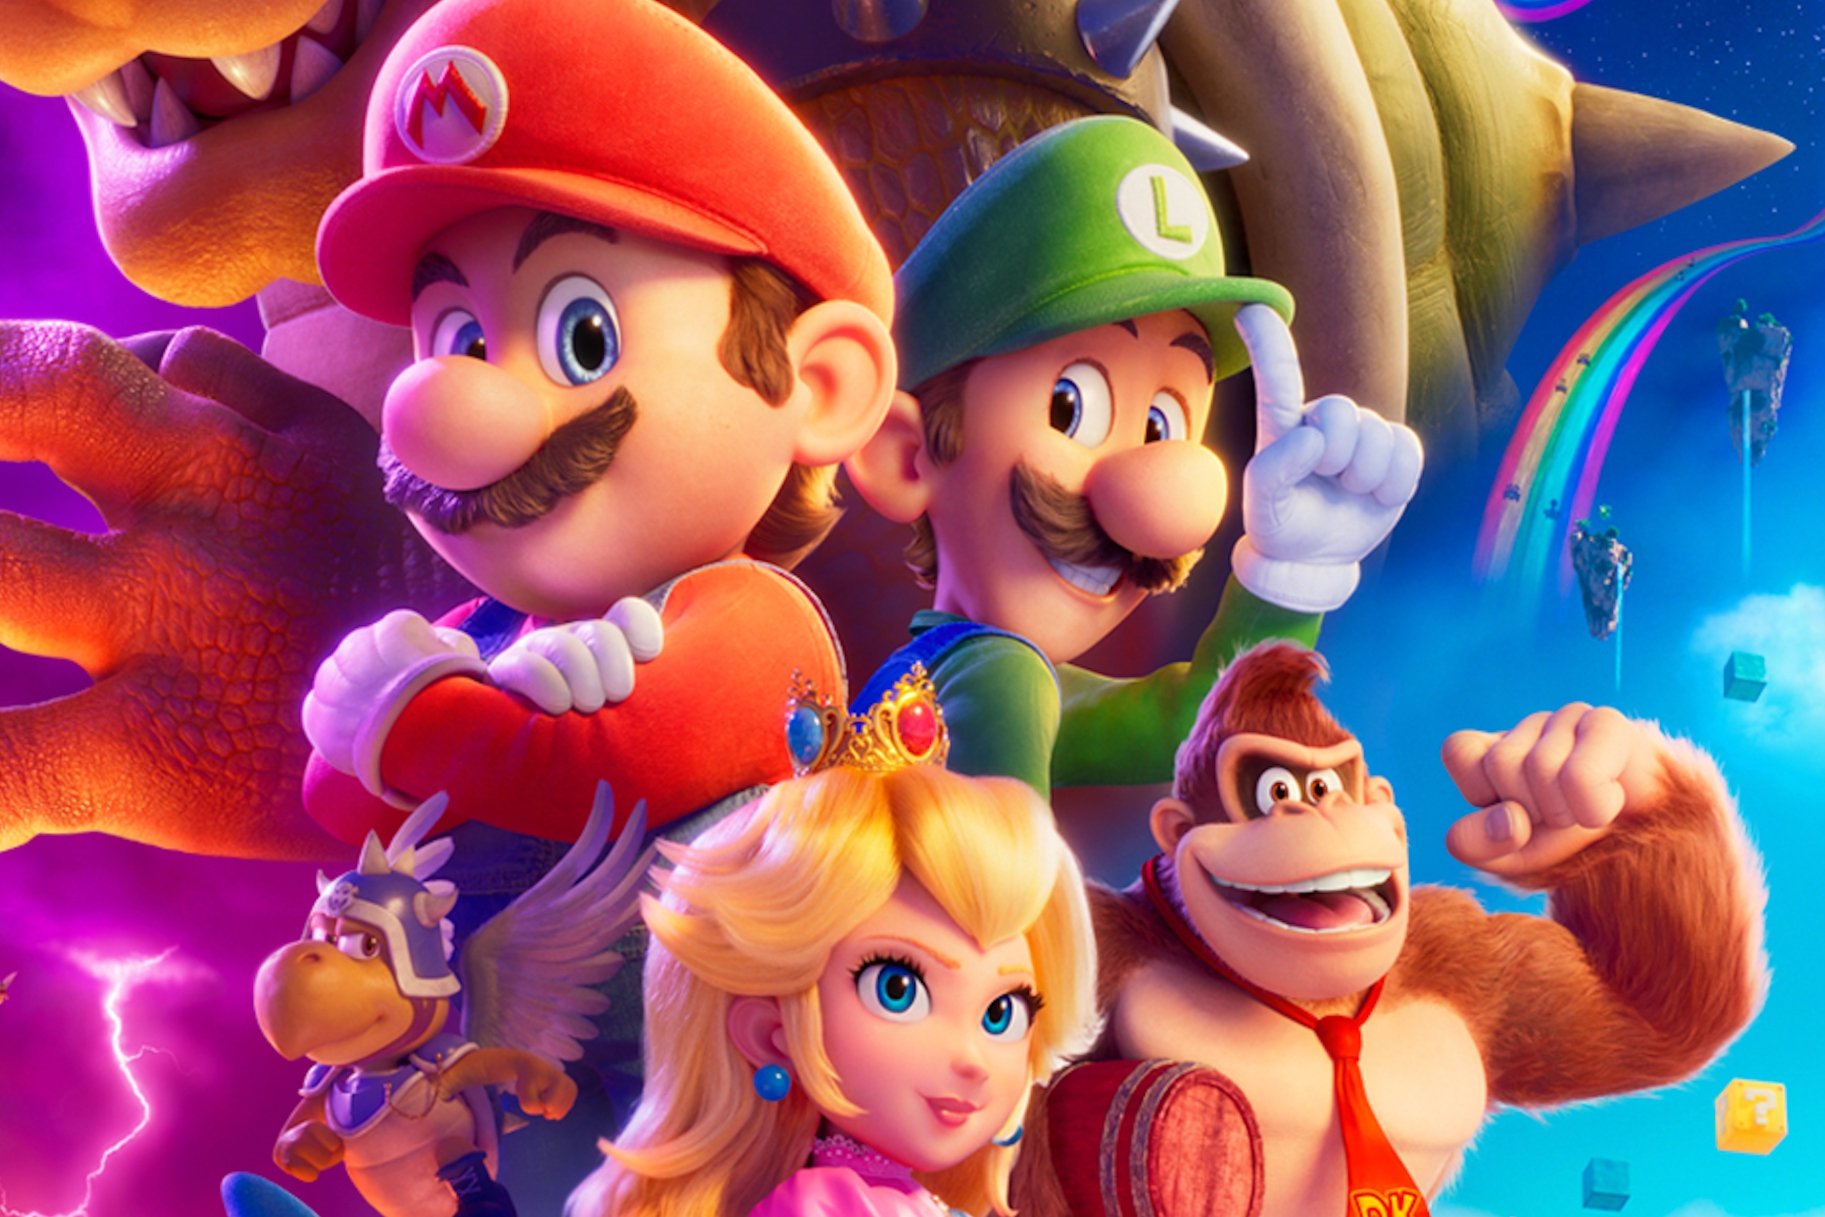 Can Super Mario Bros Finally Come to PlayStation 4 This Year